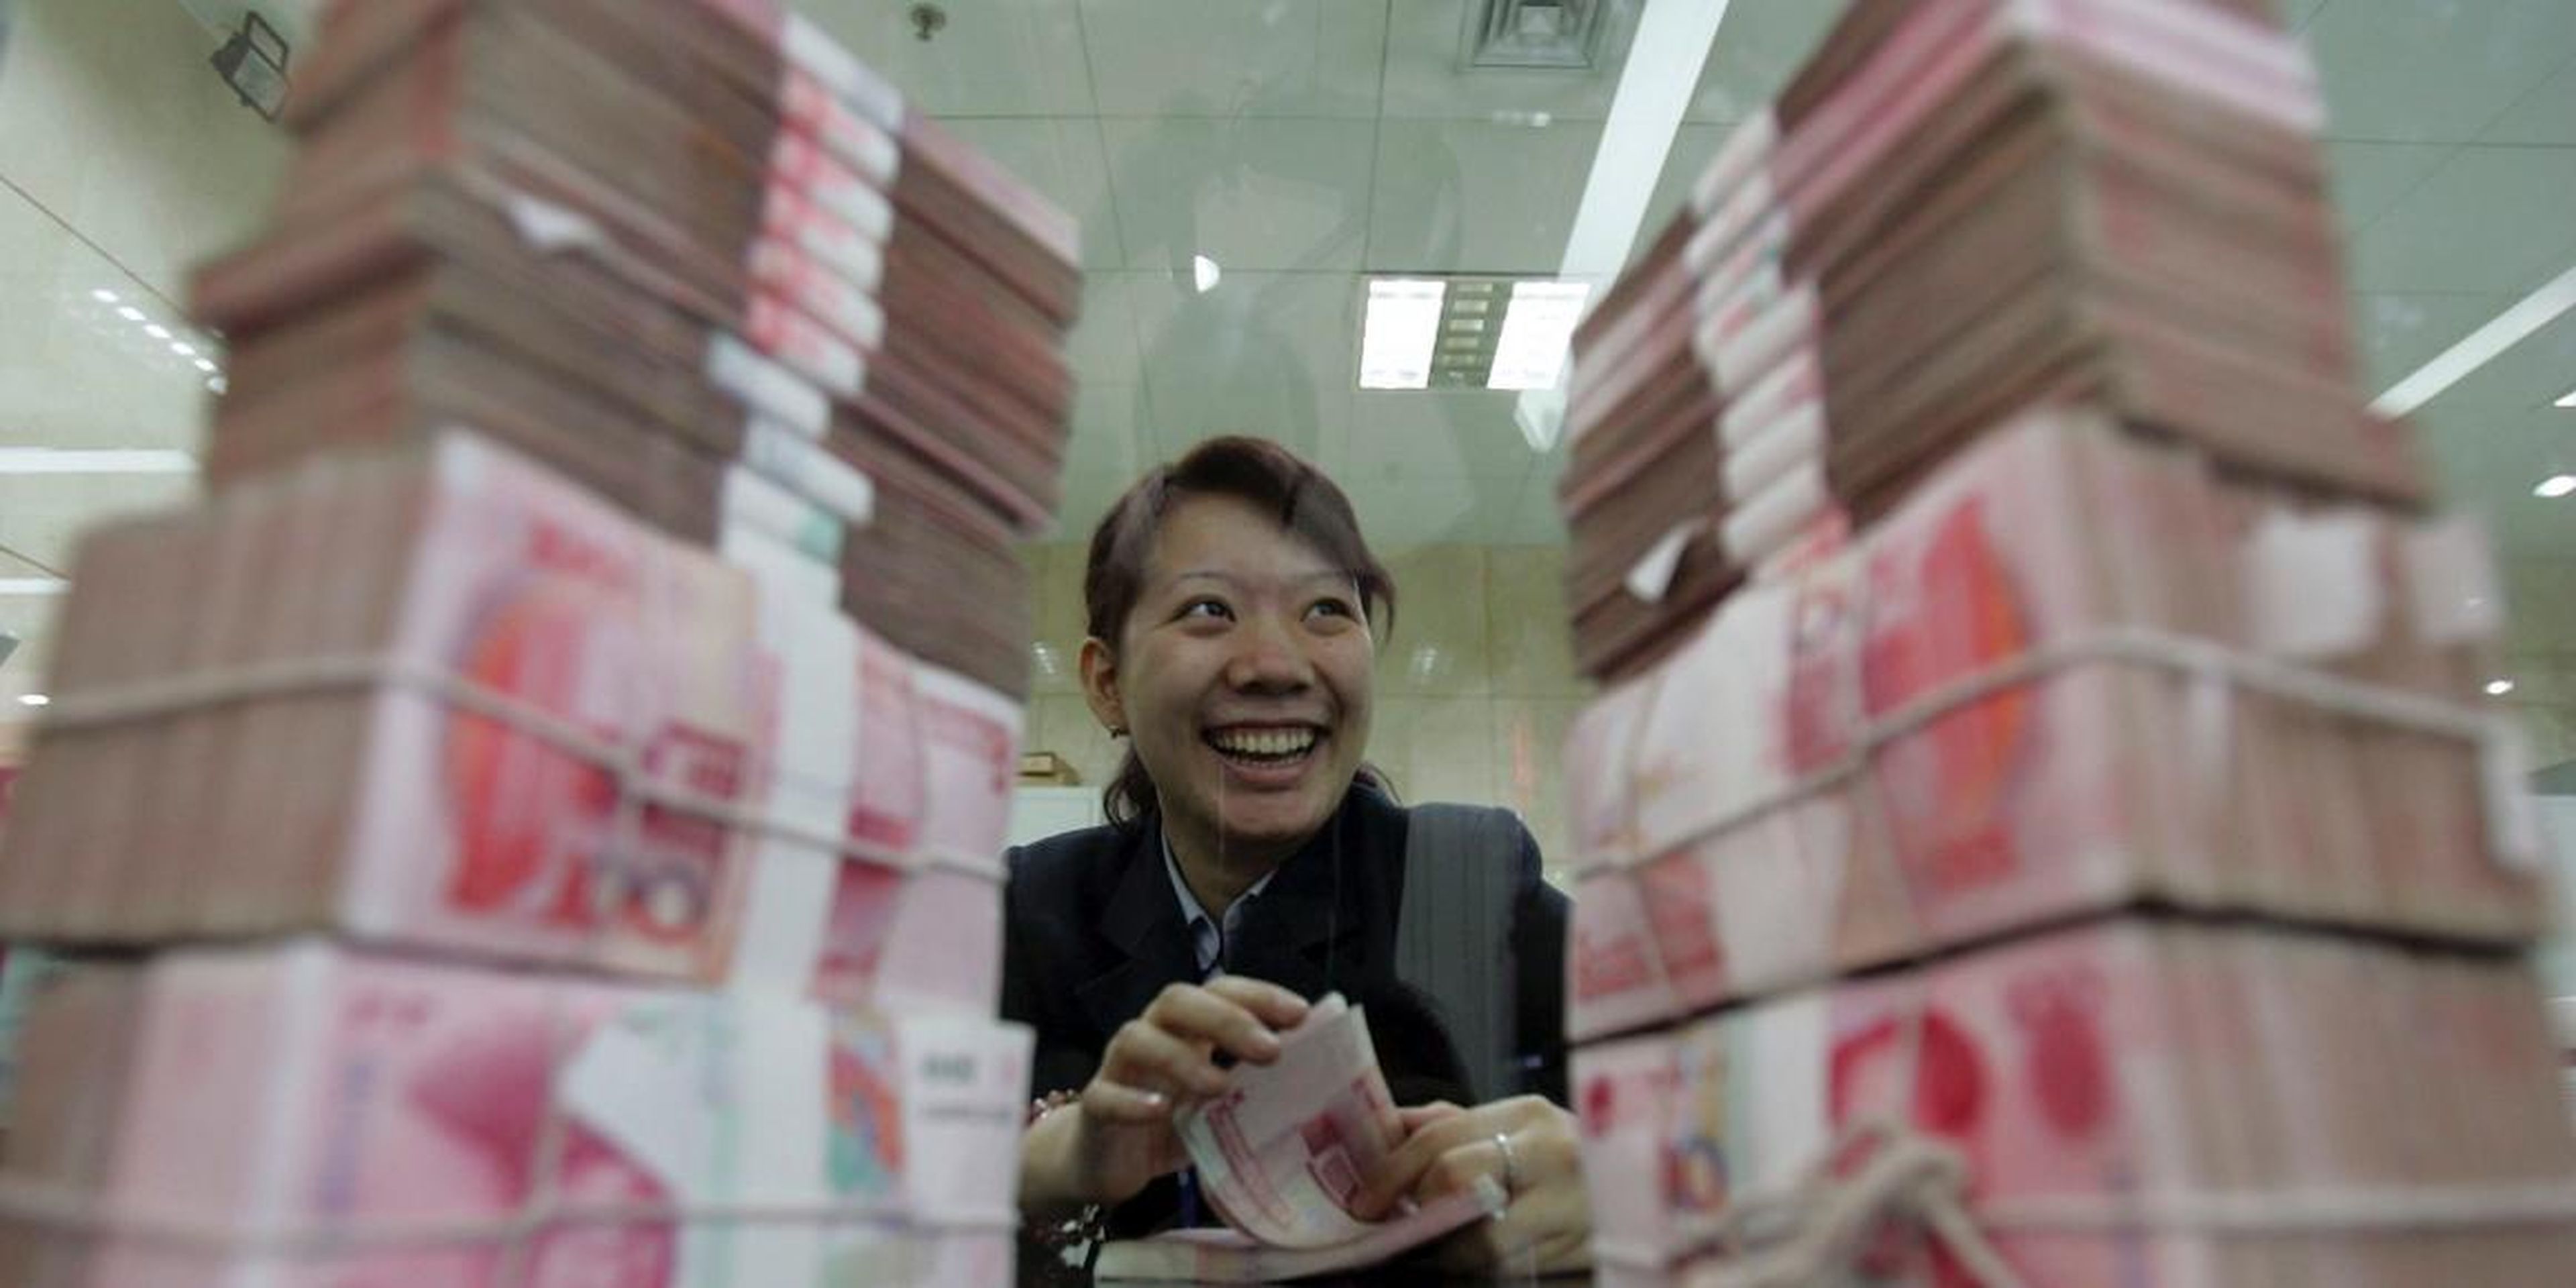 A woman sits between stacks of 100 yuan ($14.8) notes. A main argument for the social credit system is that many people still have no formal access to traditional banks and therefore need an alternative system to assess their trustworthiness.